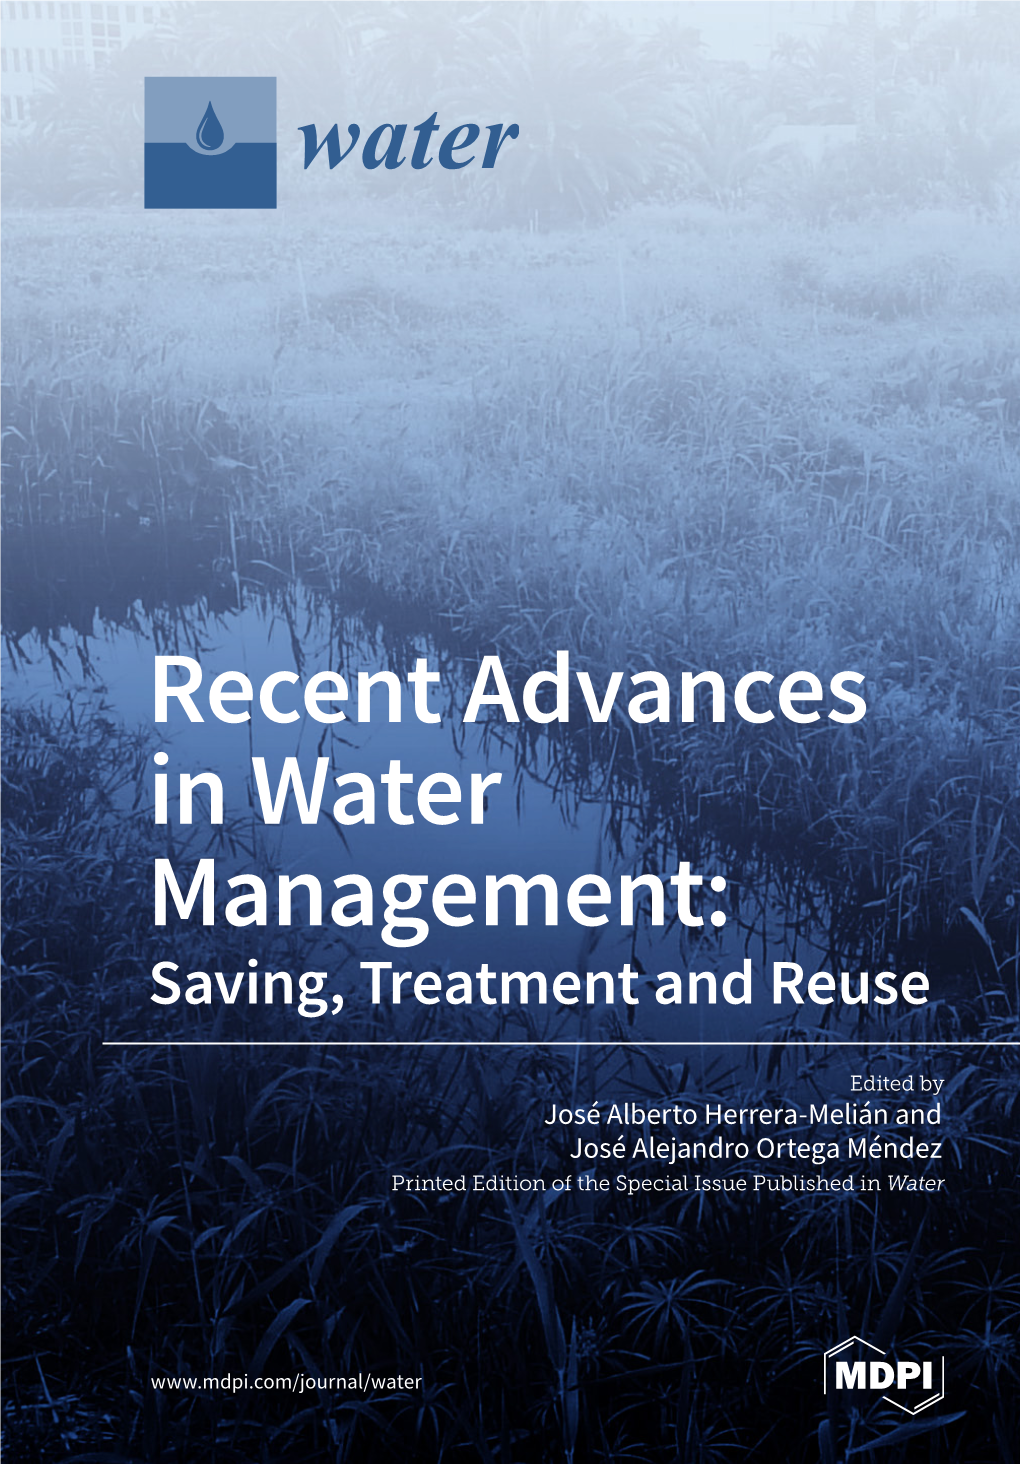 Recent Advances in Water Management: Saving, Treatment and Reuse